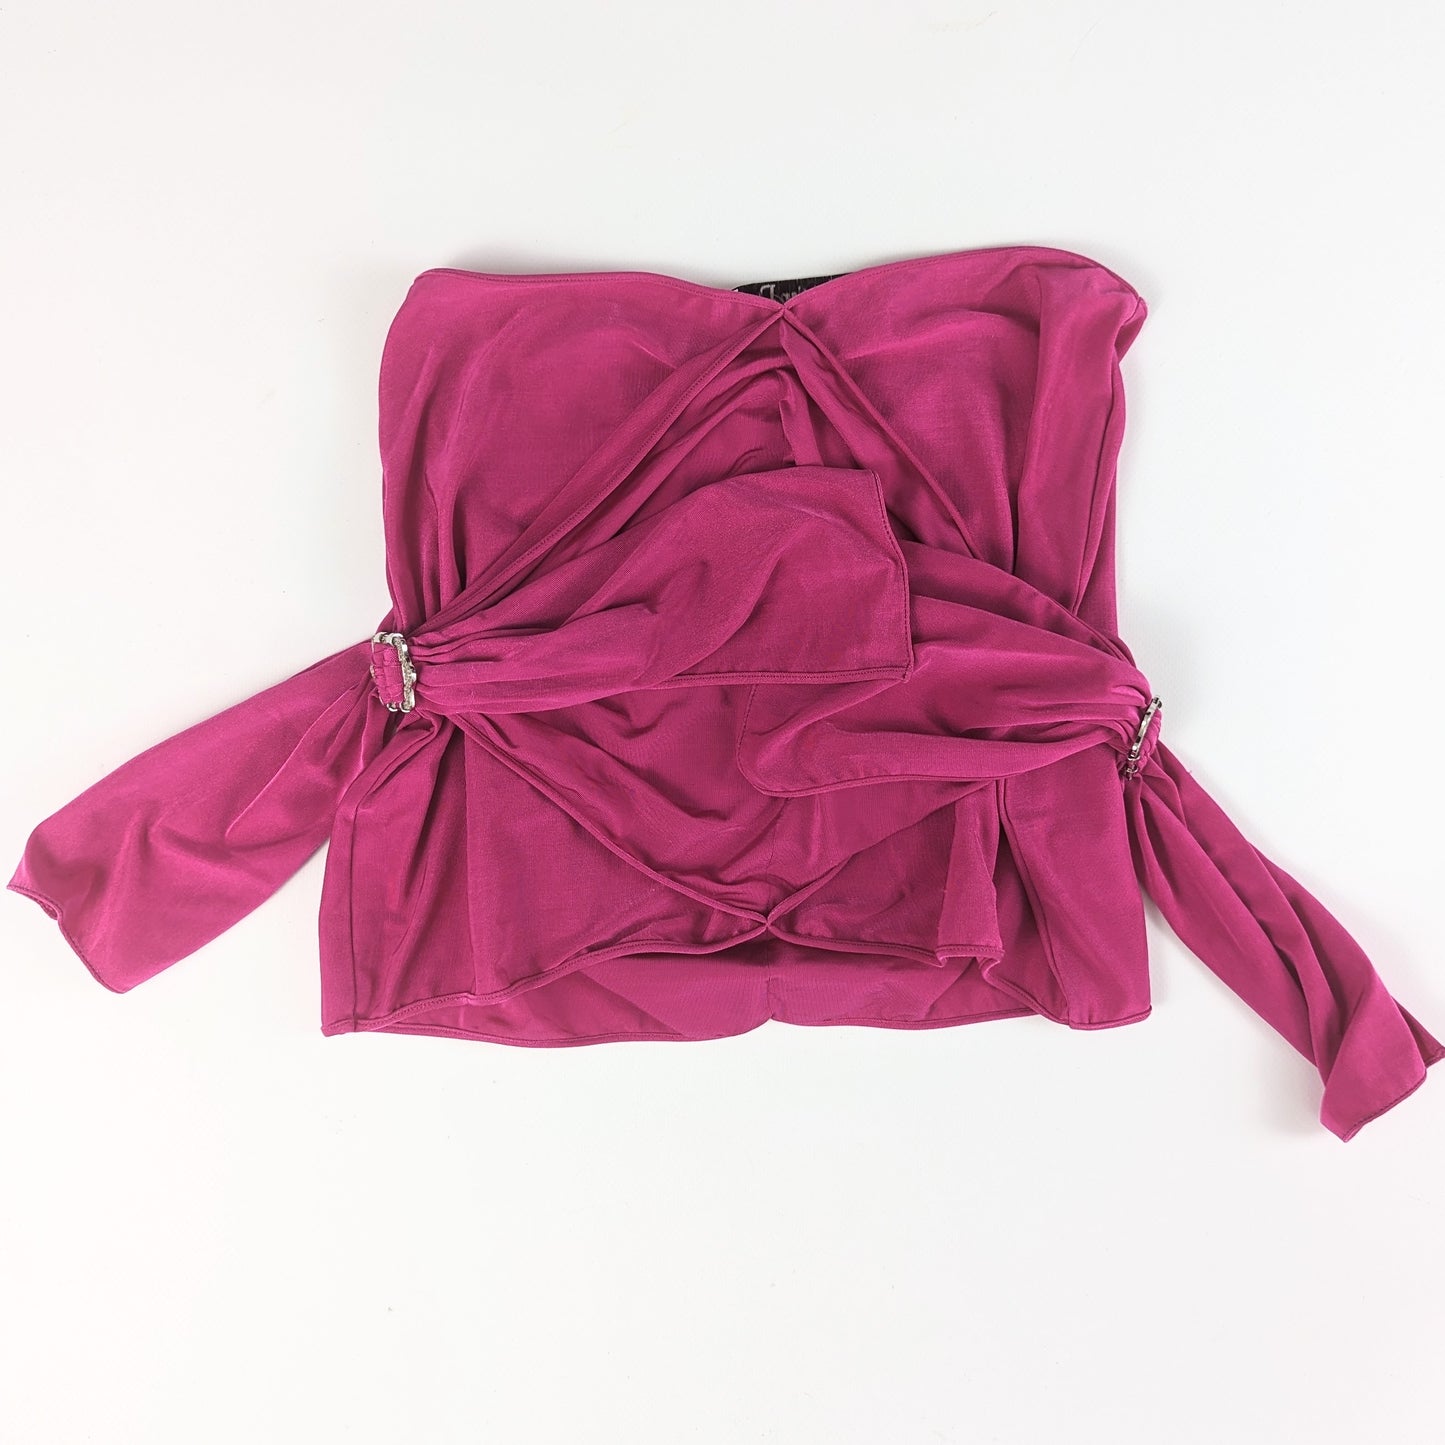 Dior pink satin skirt / top by Galliano - S